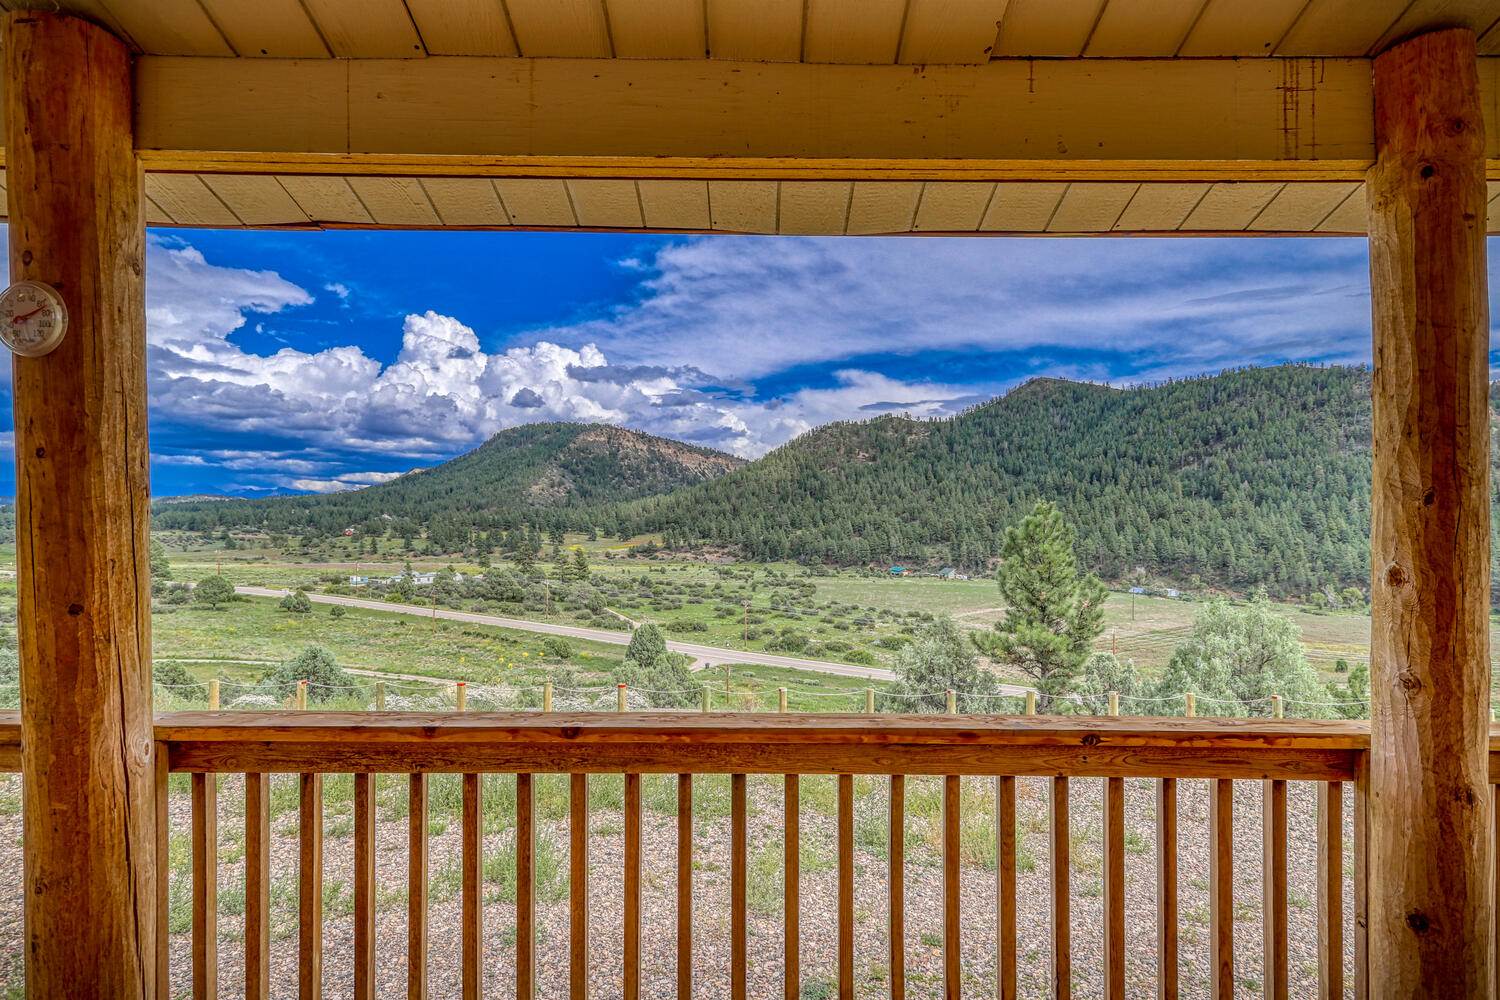 Hilltop Cabin, #14317 W Hwy 160 - St, Pagosa Springs, CO 81147